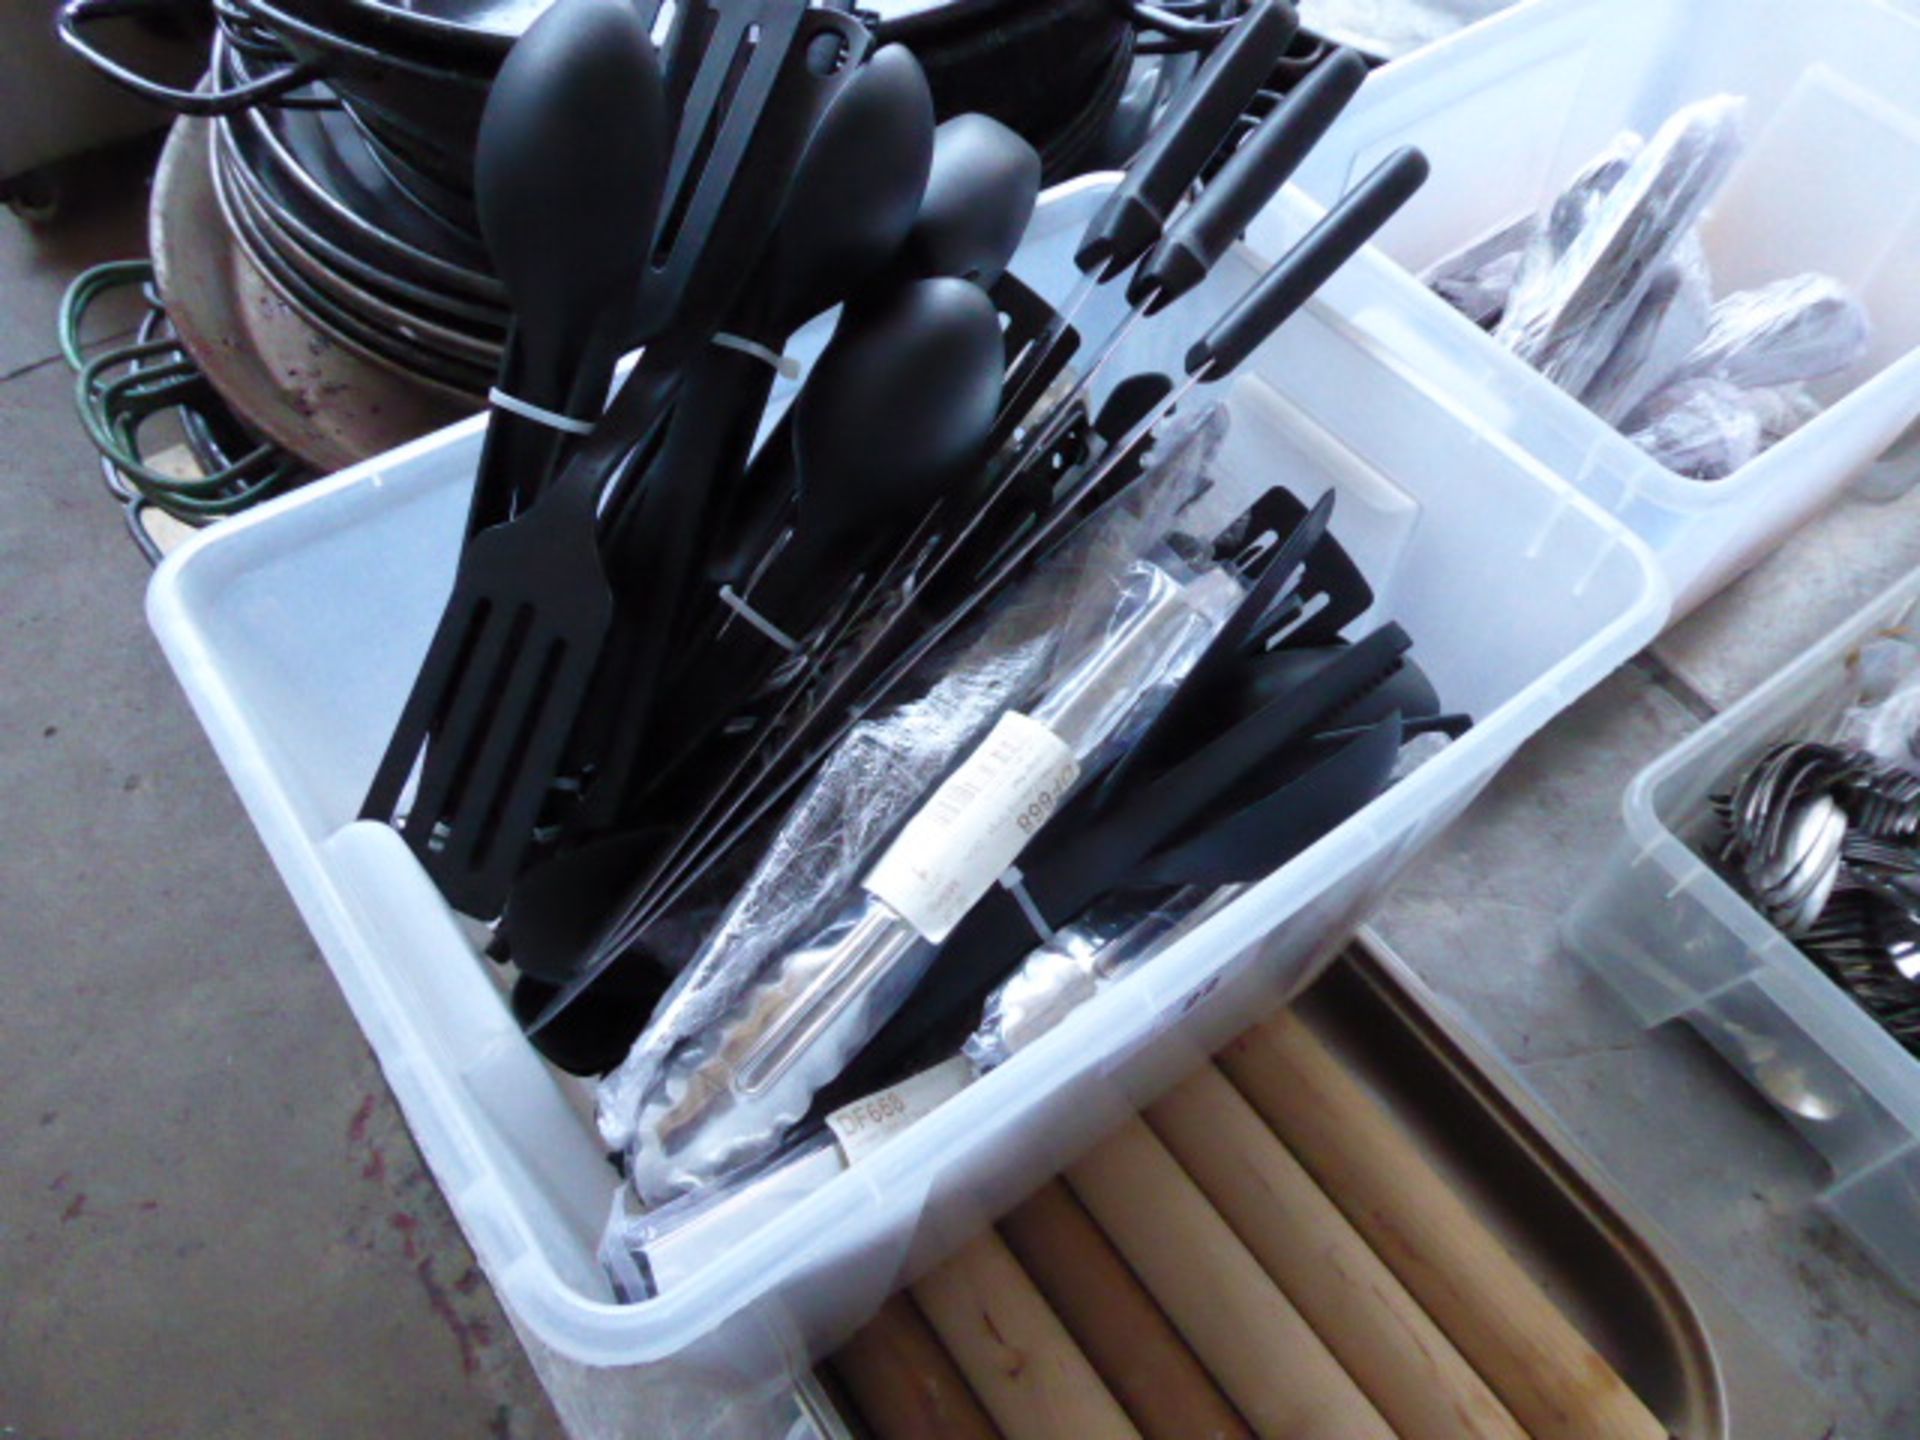 Large box of assorted plastic and metal cooking utensils and a tray of rolling pins